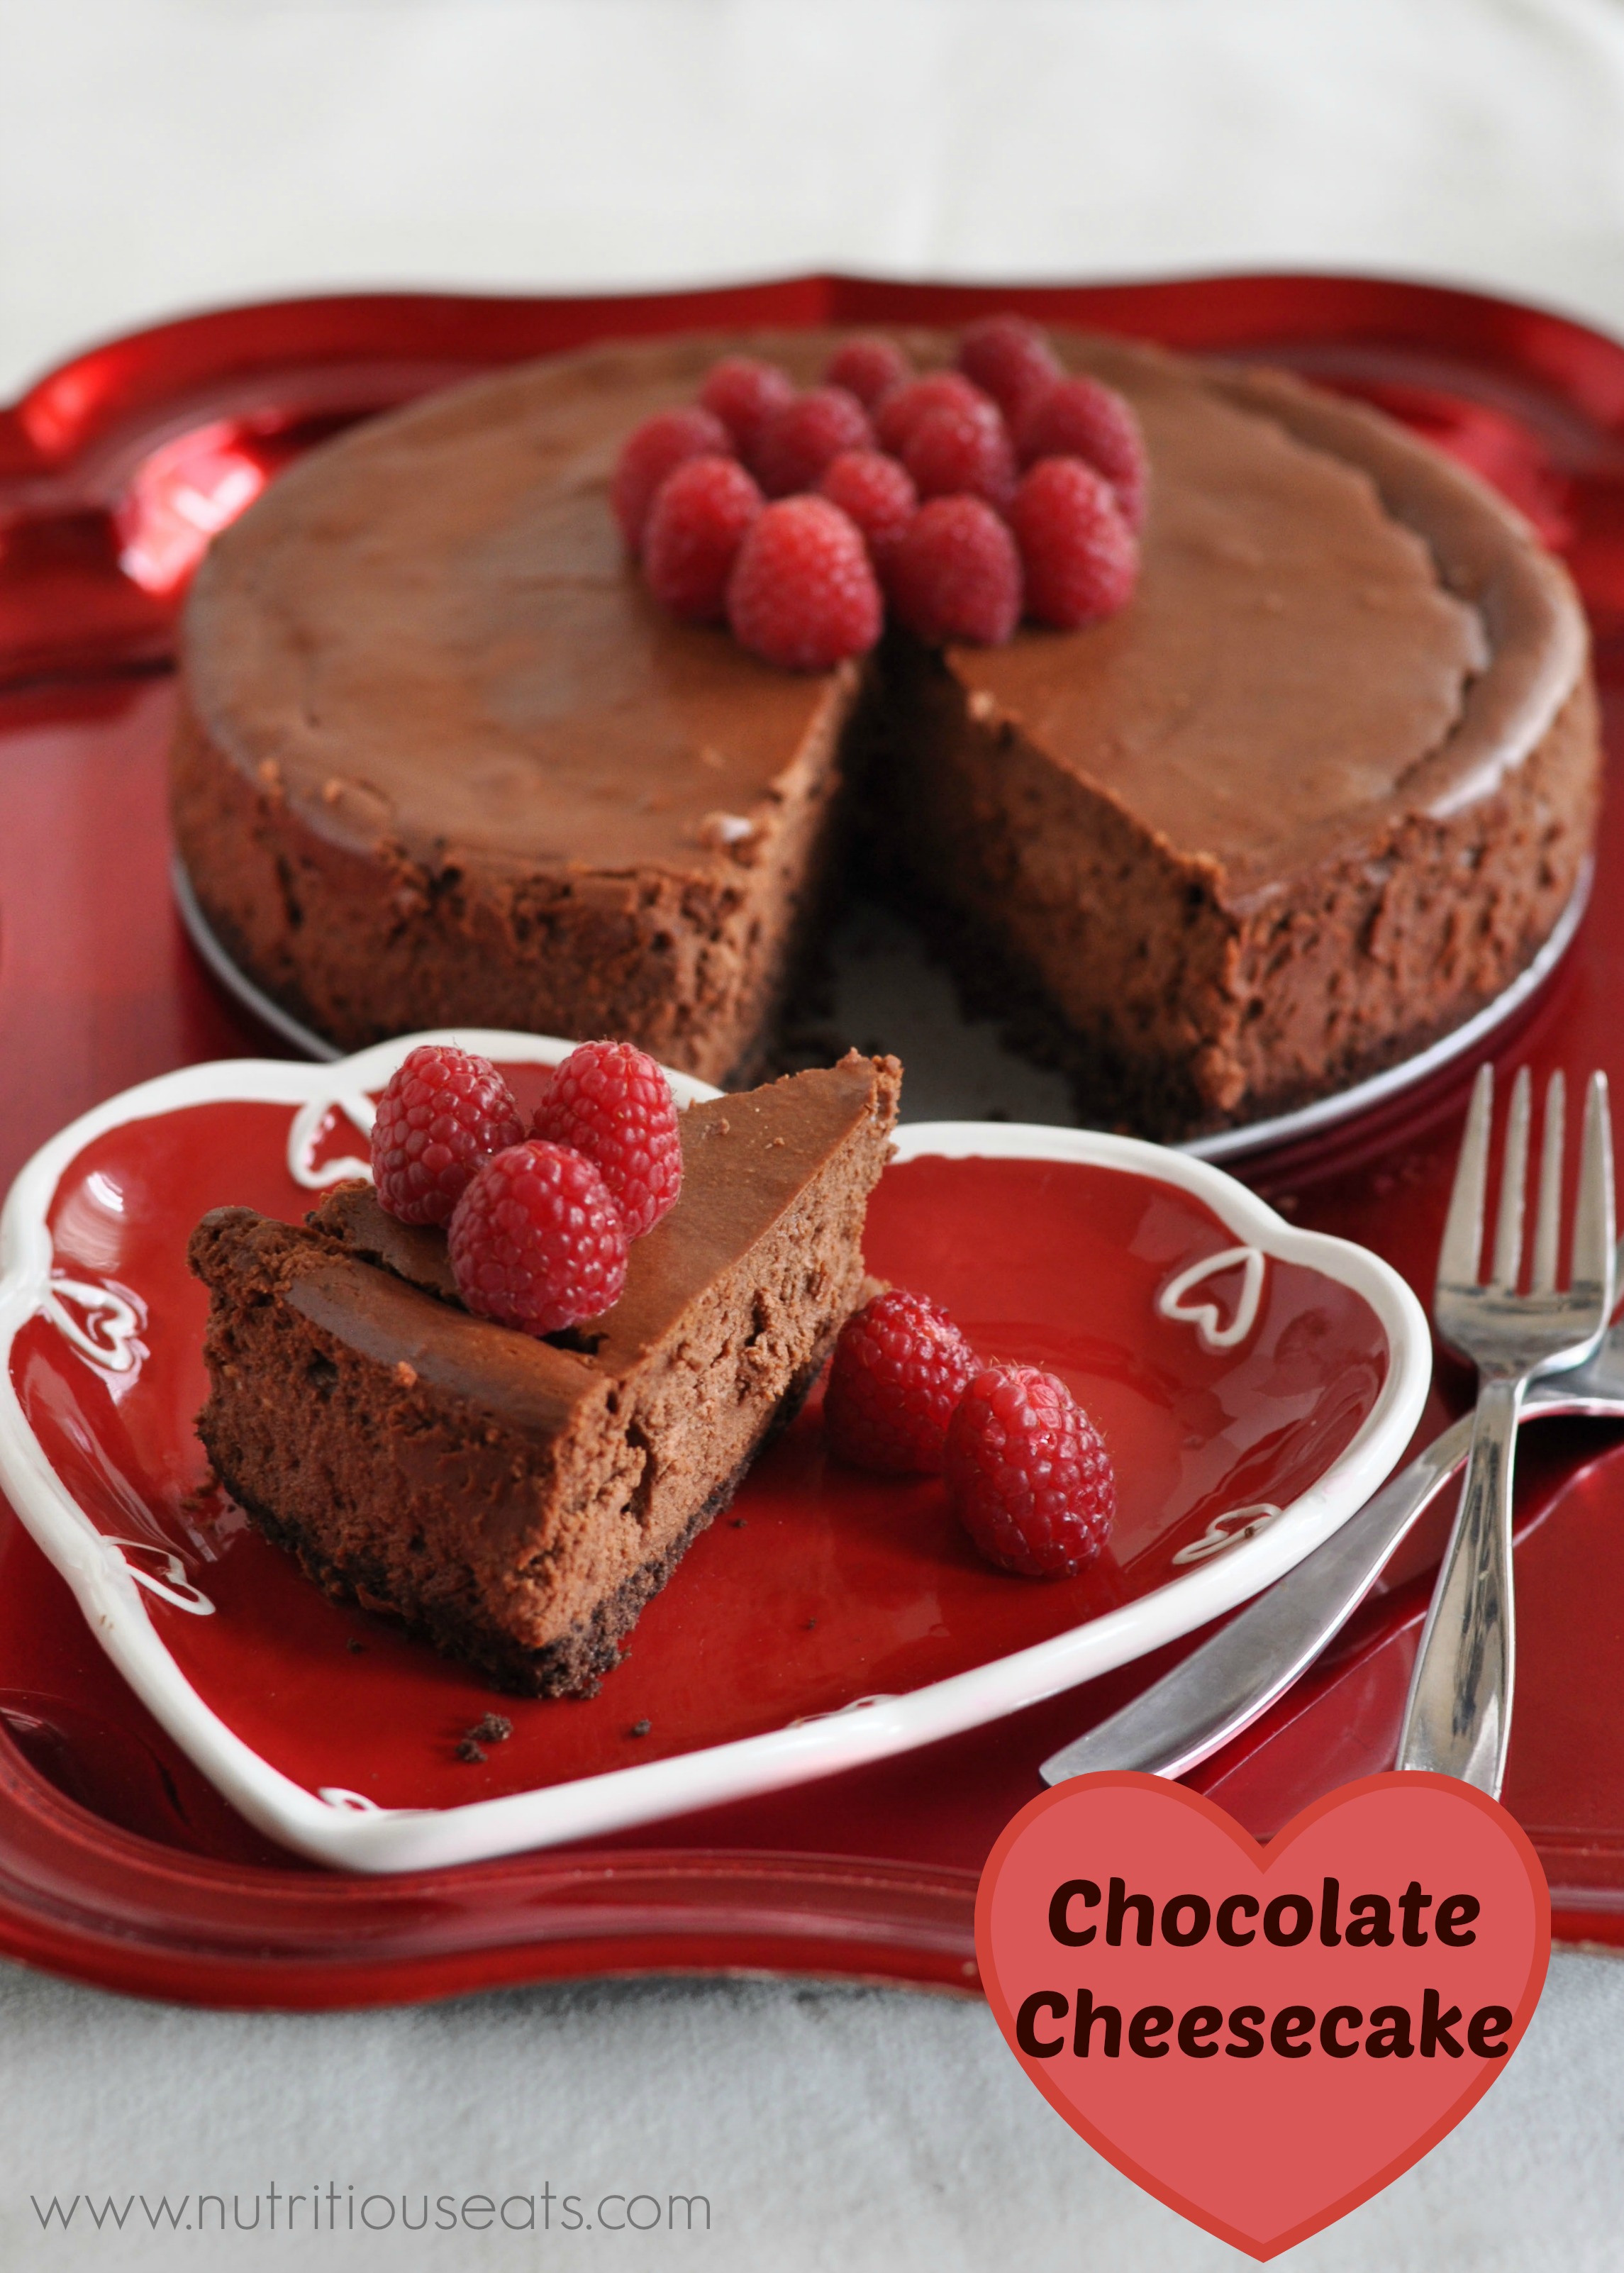 Double Chocolate Cheesecake | www.nutritiouseats.com - Nutritious Eats